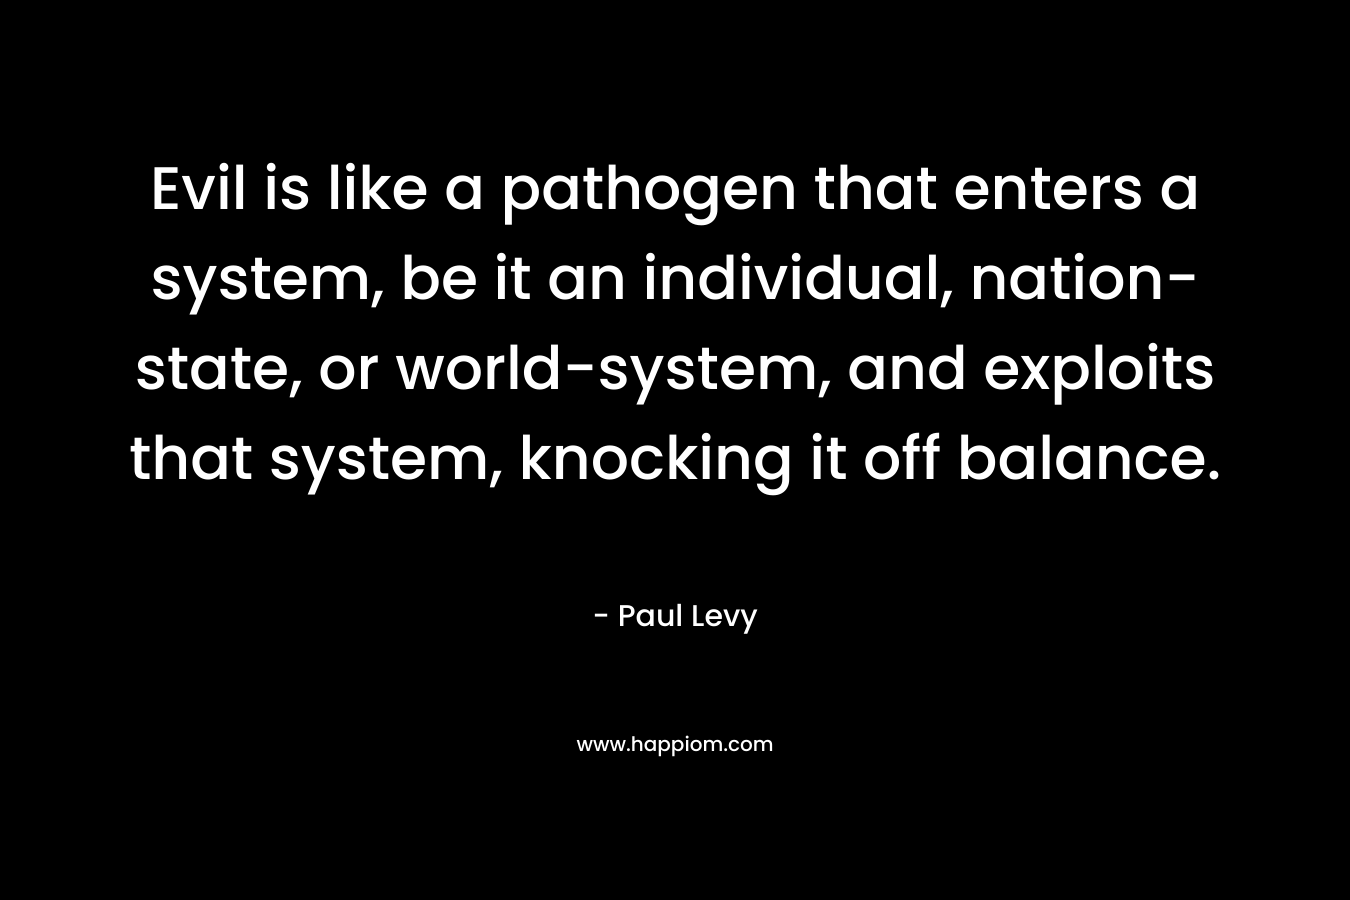 Evil is like a pathogen that enters a system, be it an individual, nation-state, or world-system, and exploits that system, knocking it off balance.